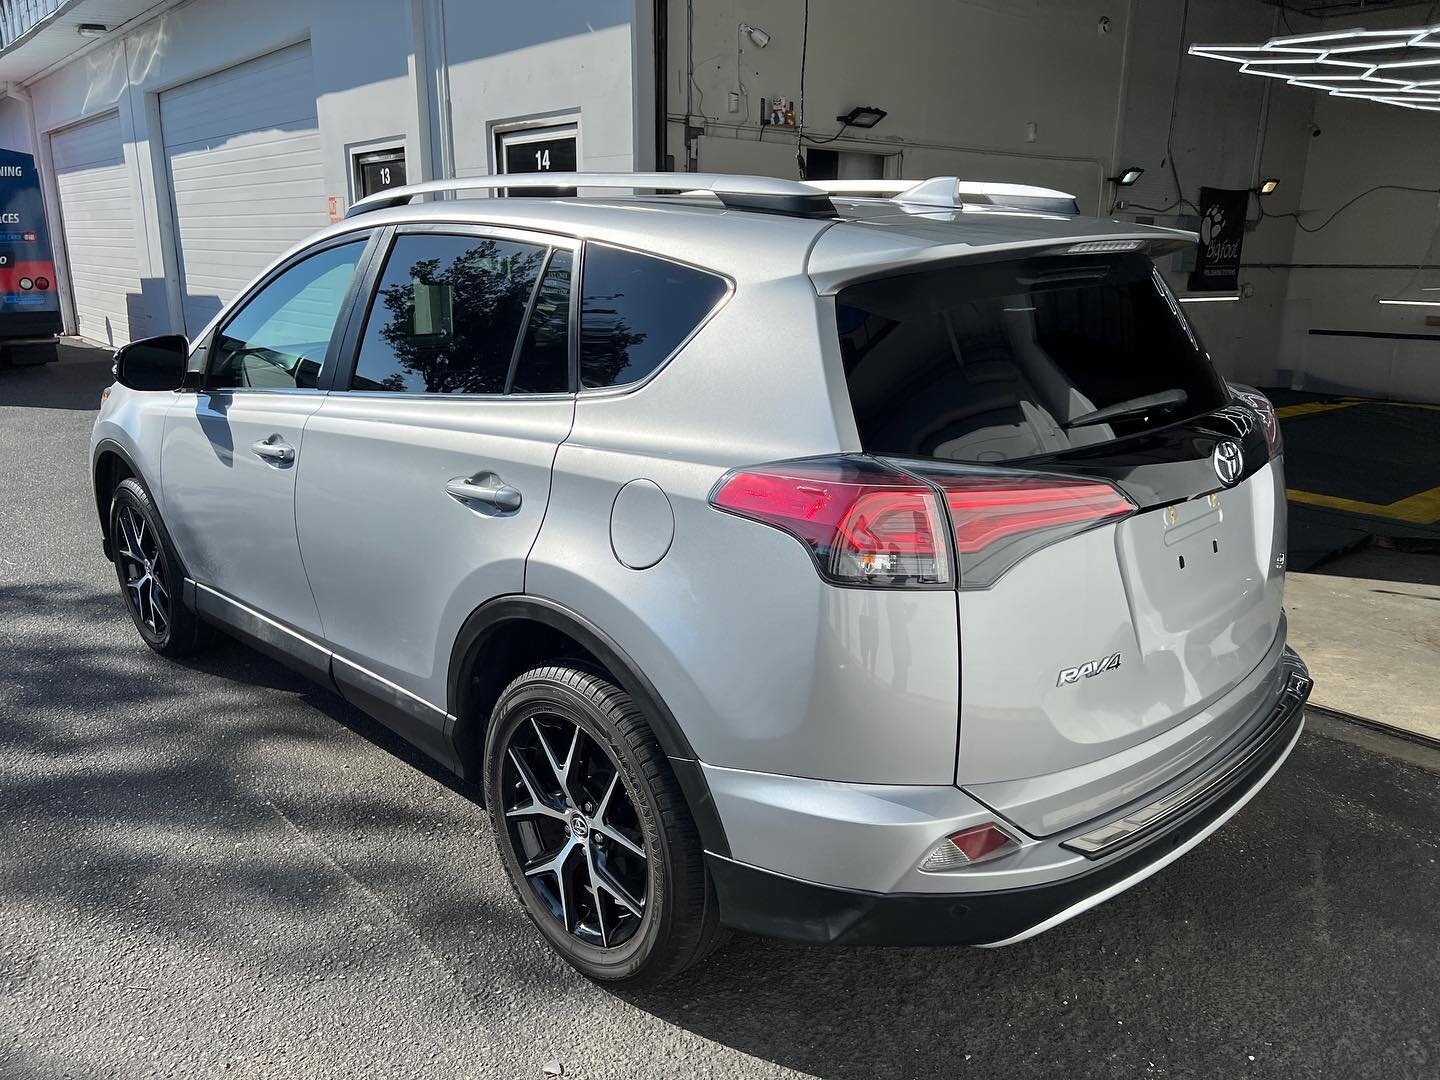 New-to-them rav4 finished with a single step polish prep prior to coating with Cs2 Ceramic and rehydrating the plastics with blackwow pro. 

This thing has definitely been through some swirl-o-matic machine washes in the past. The new owners wanted t